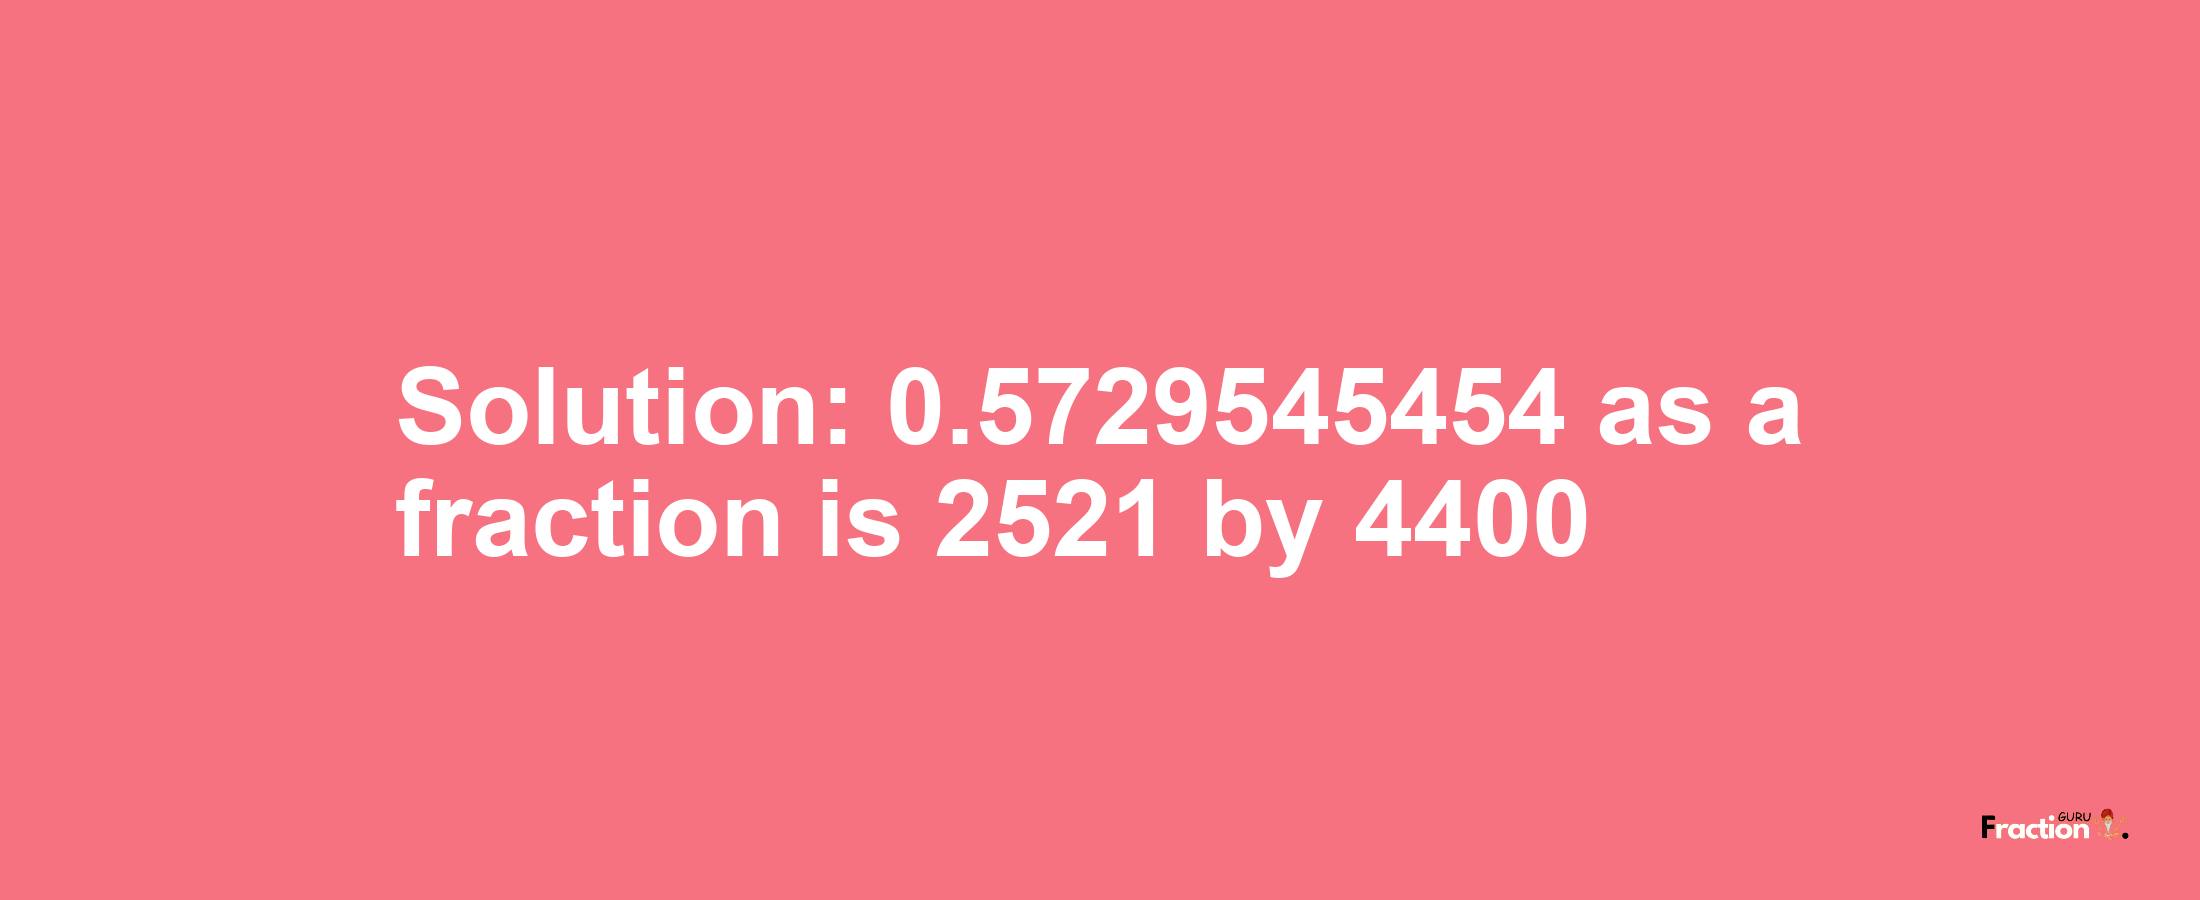 Solution:0.5729545454 as a fraction is 2521/4400